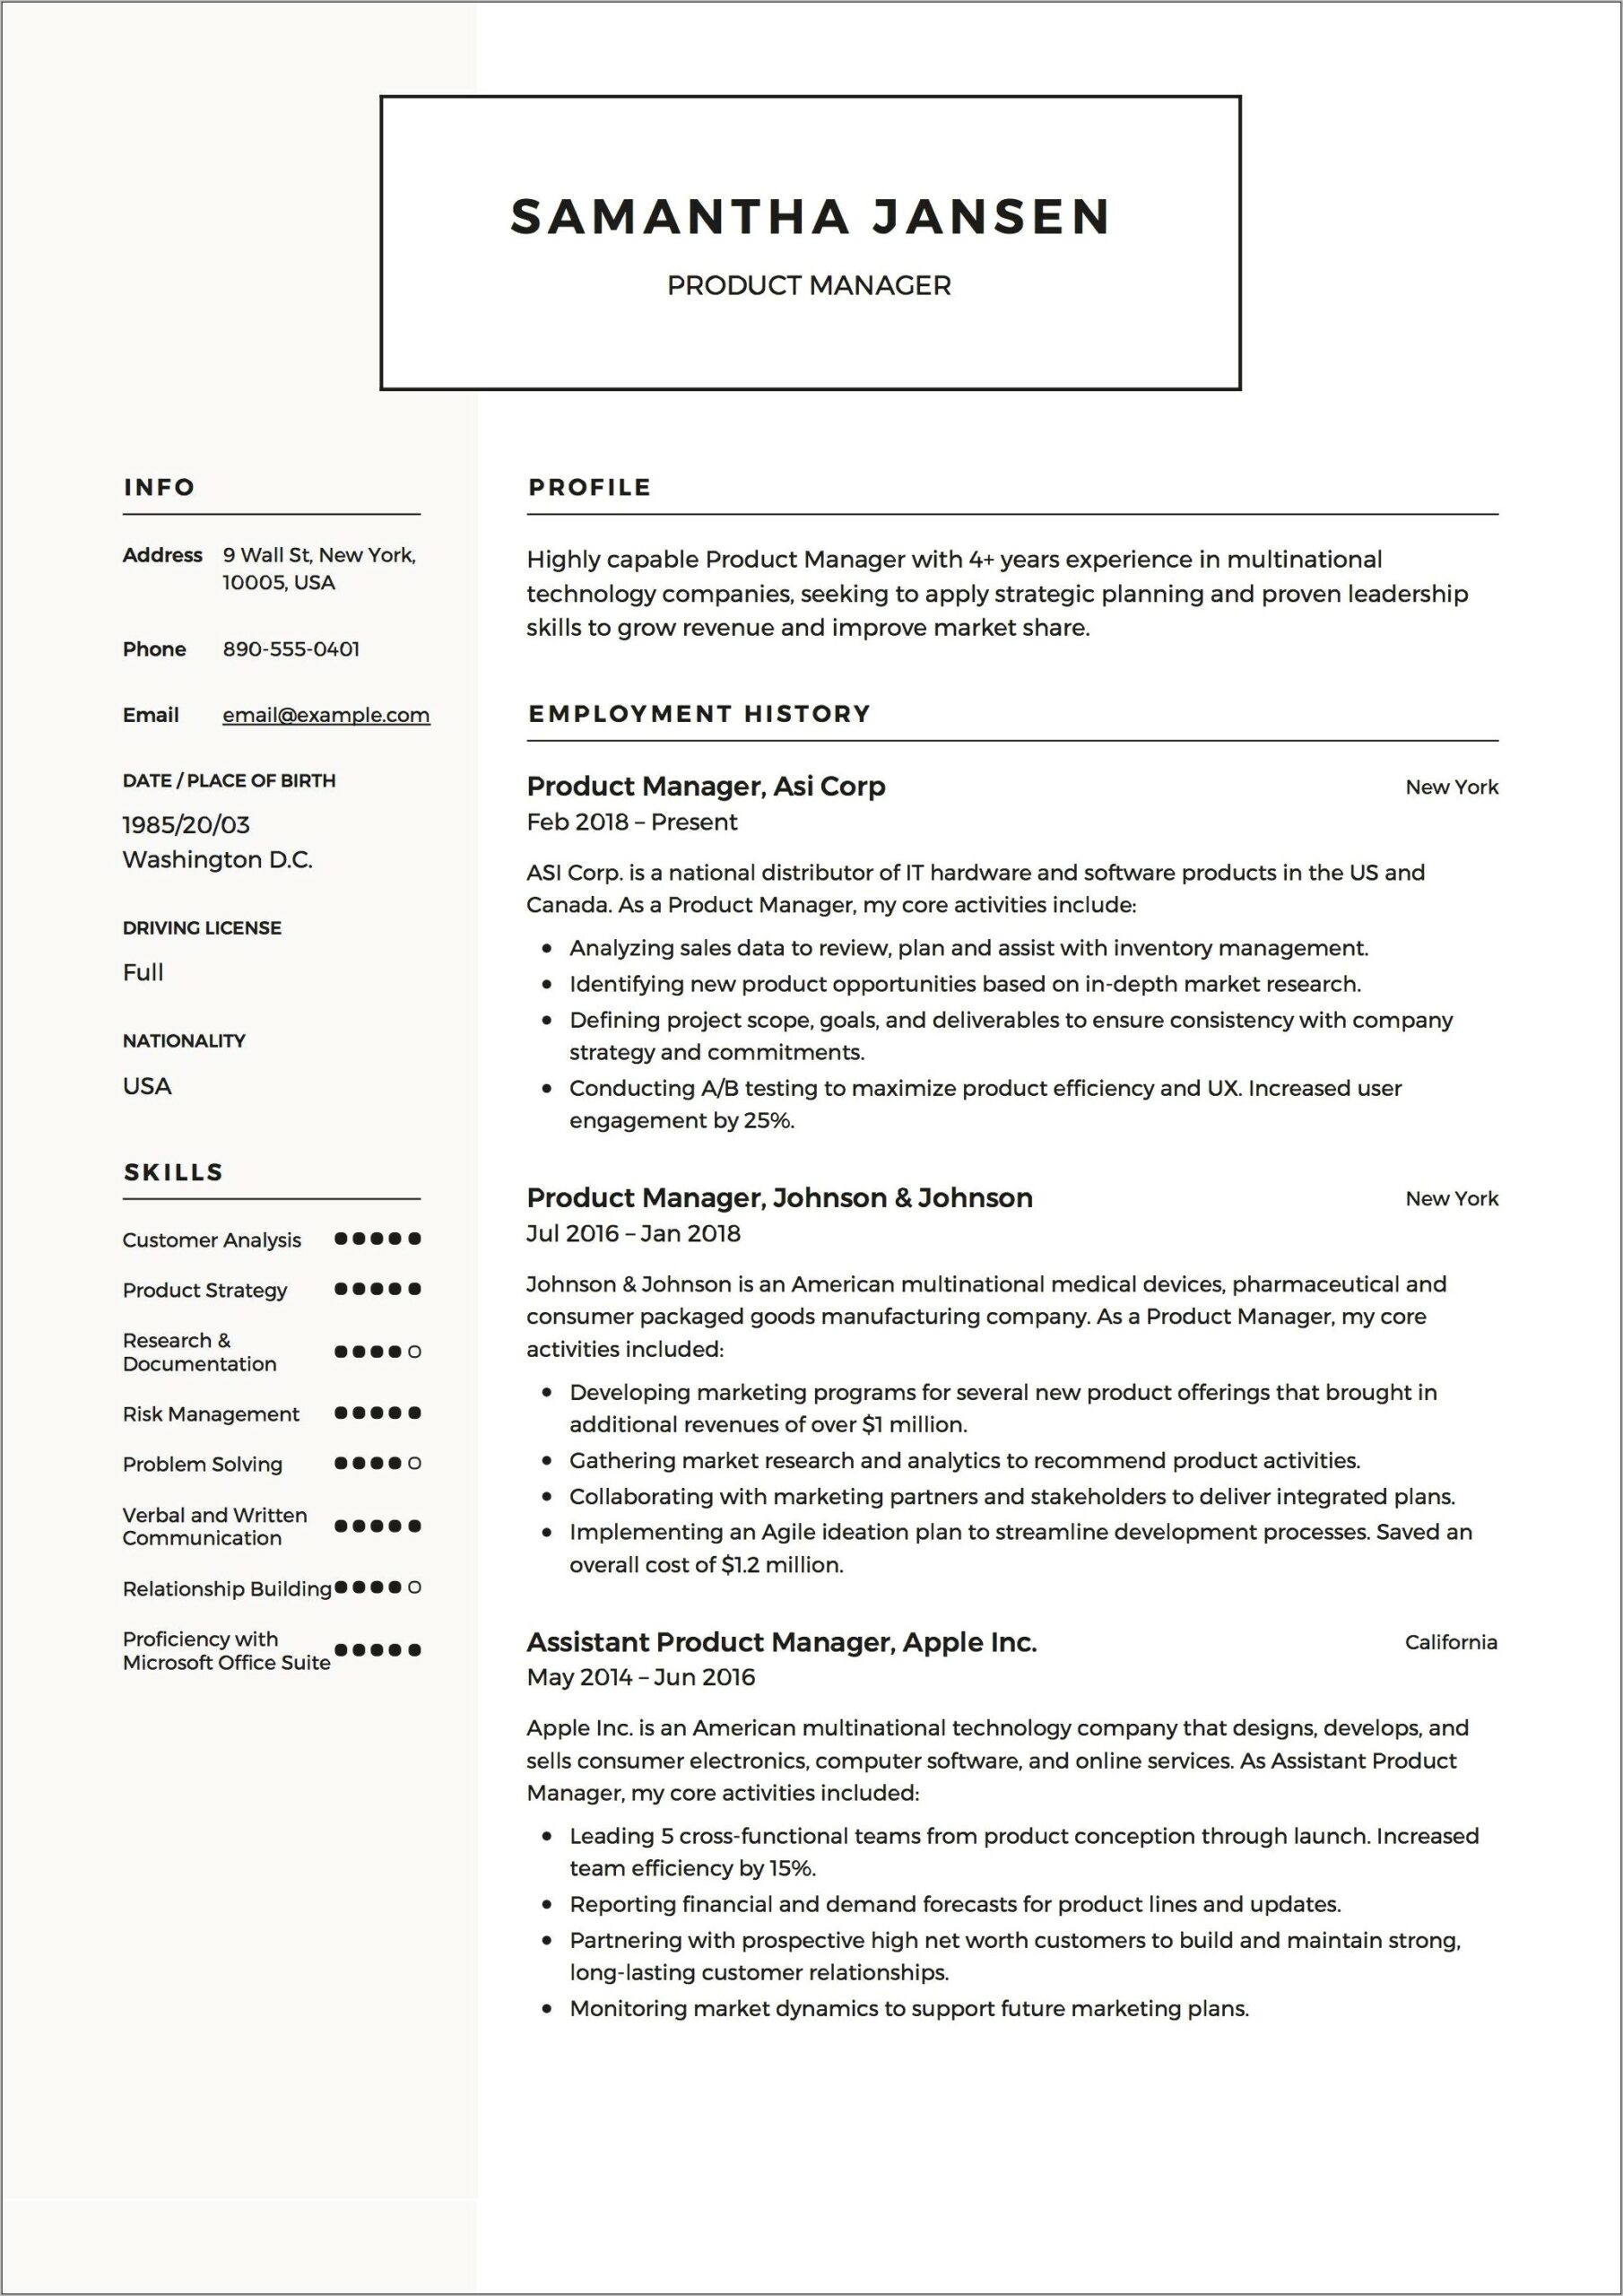 Software Product Manager Resume Example